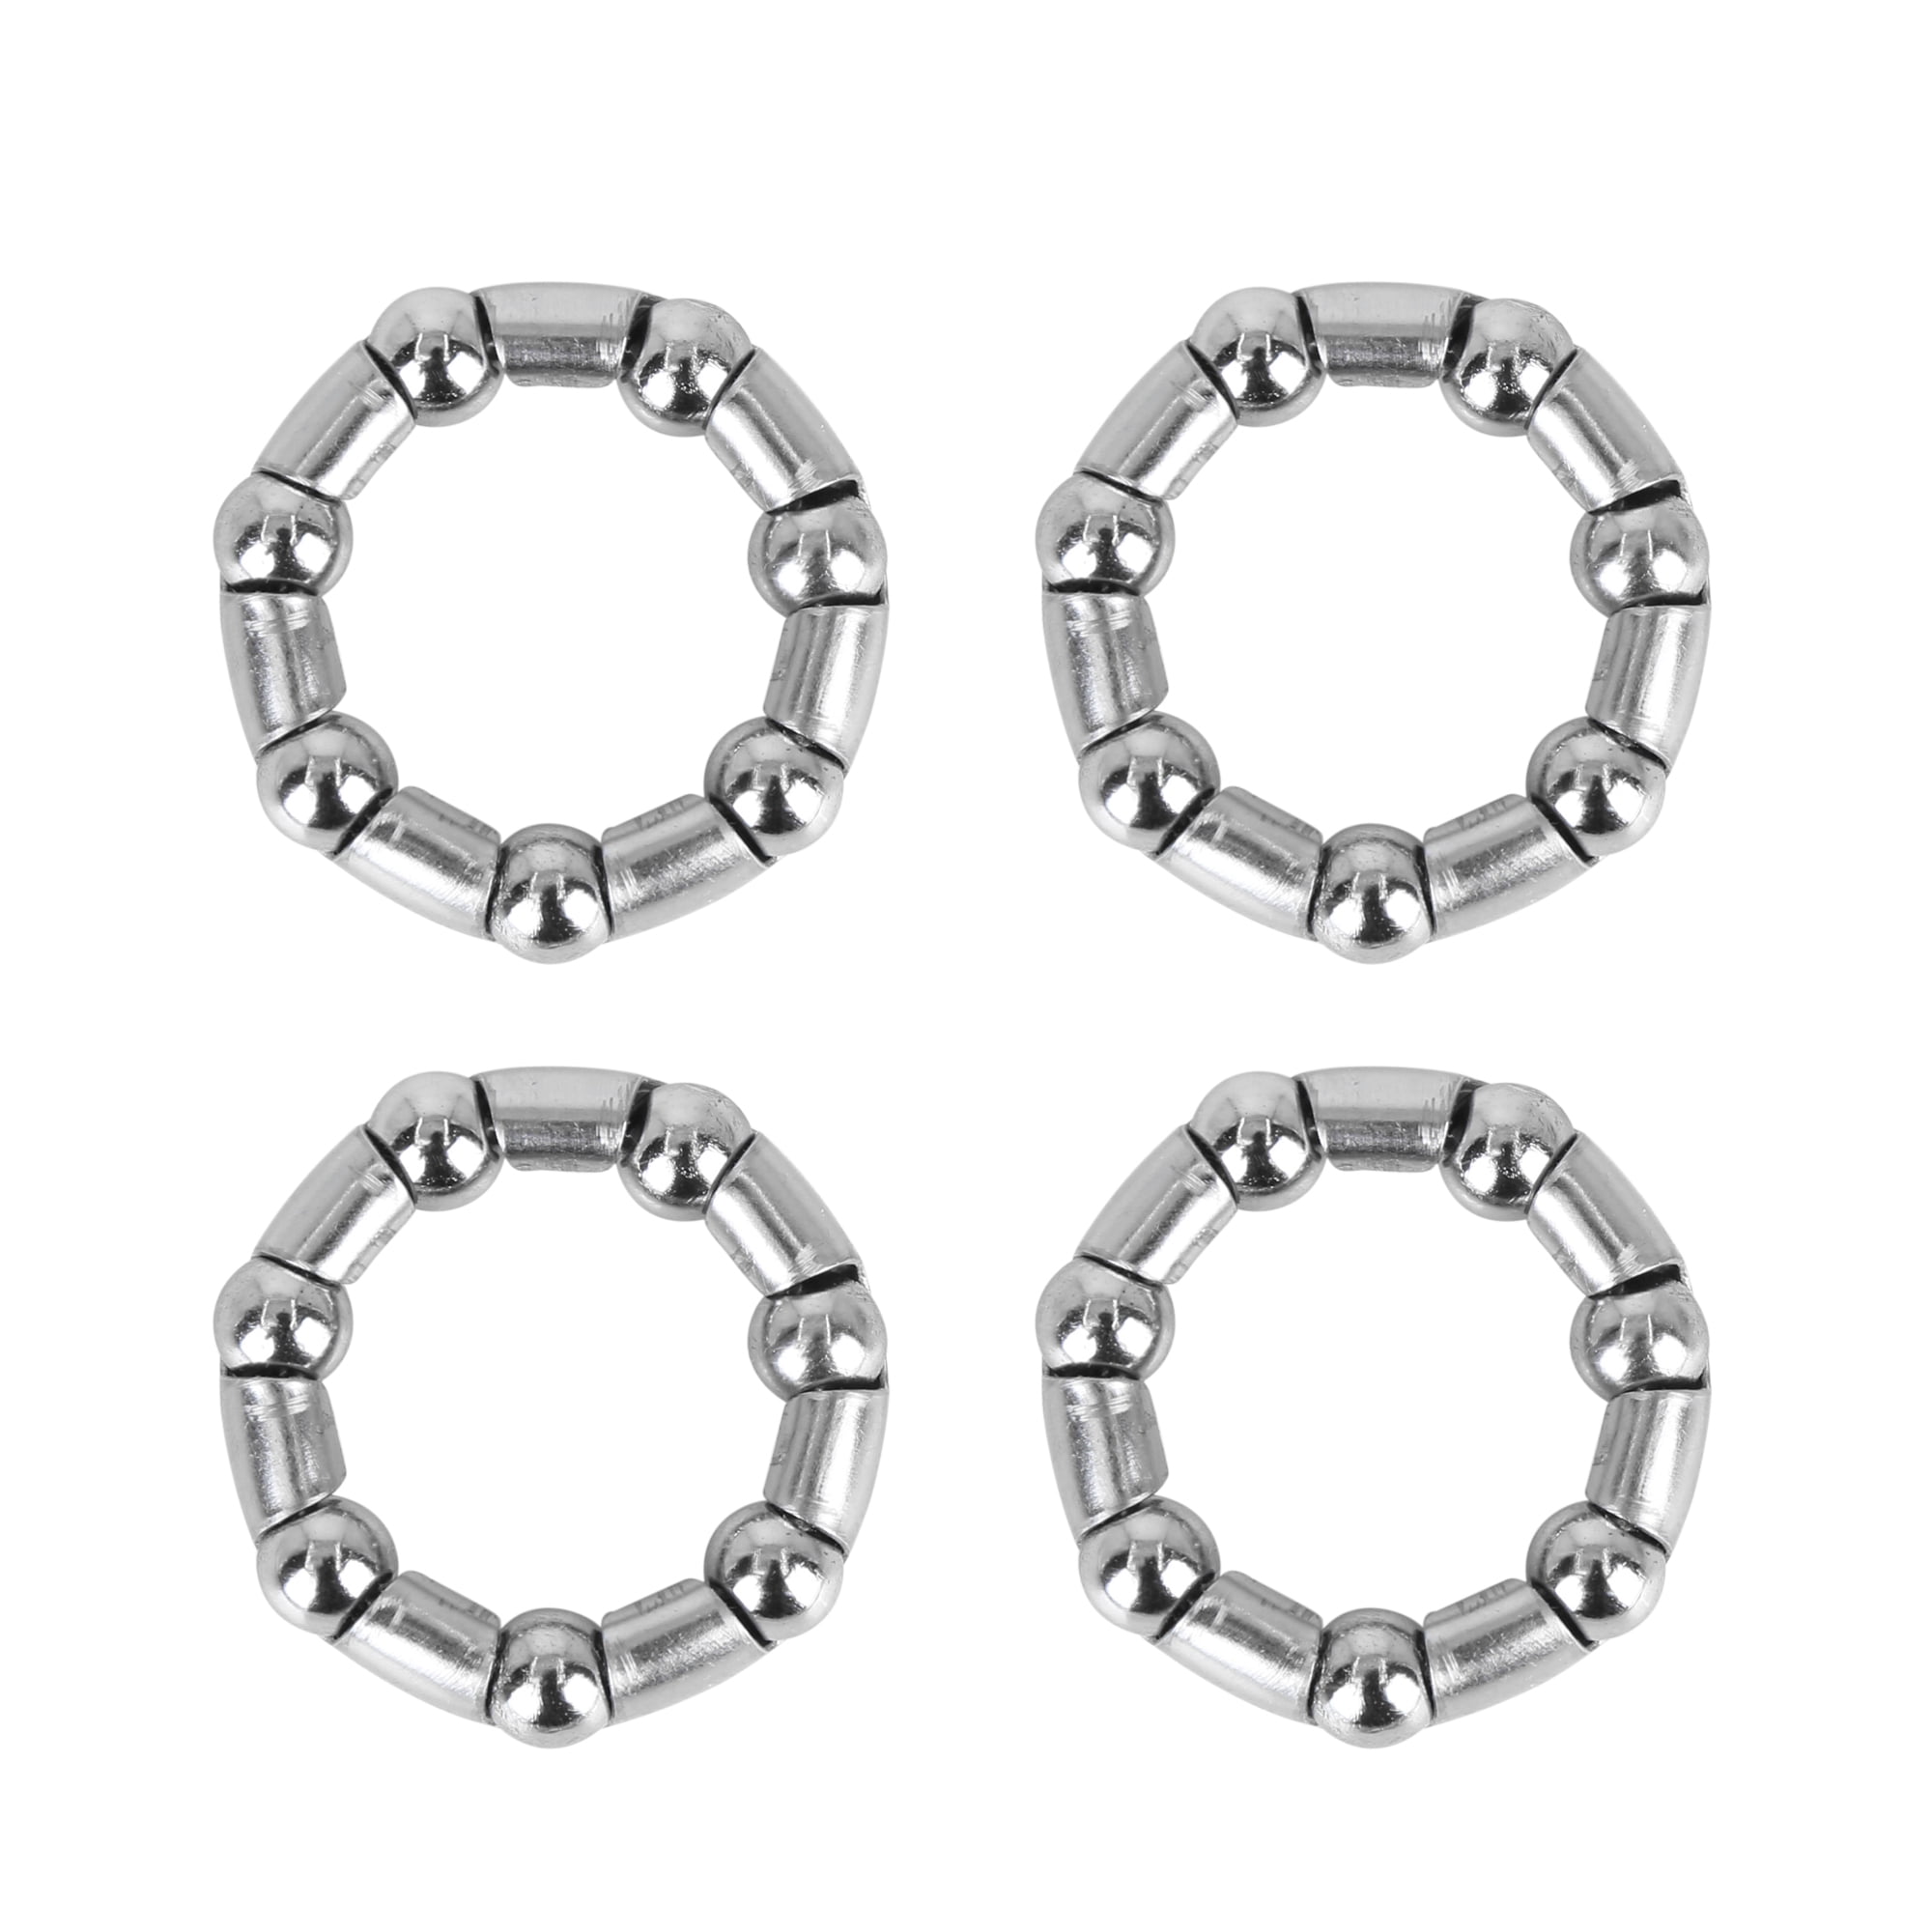 Unique Bargains 4pcs 20.5mm x 7 Ball Bearing Cages Crank Bearings Wheel  Bearing Retainer for Bicycle Bike 